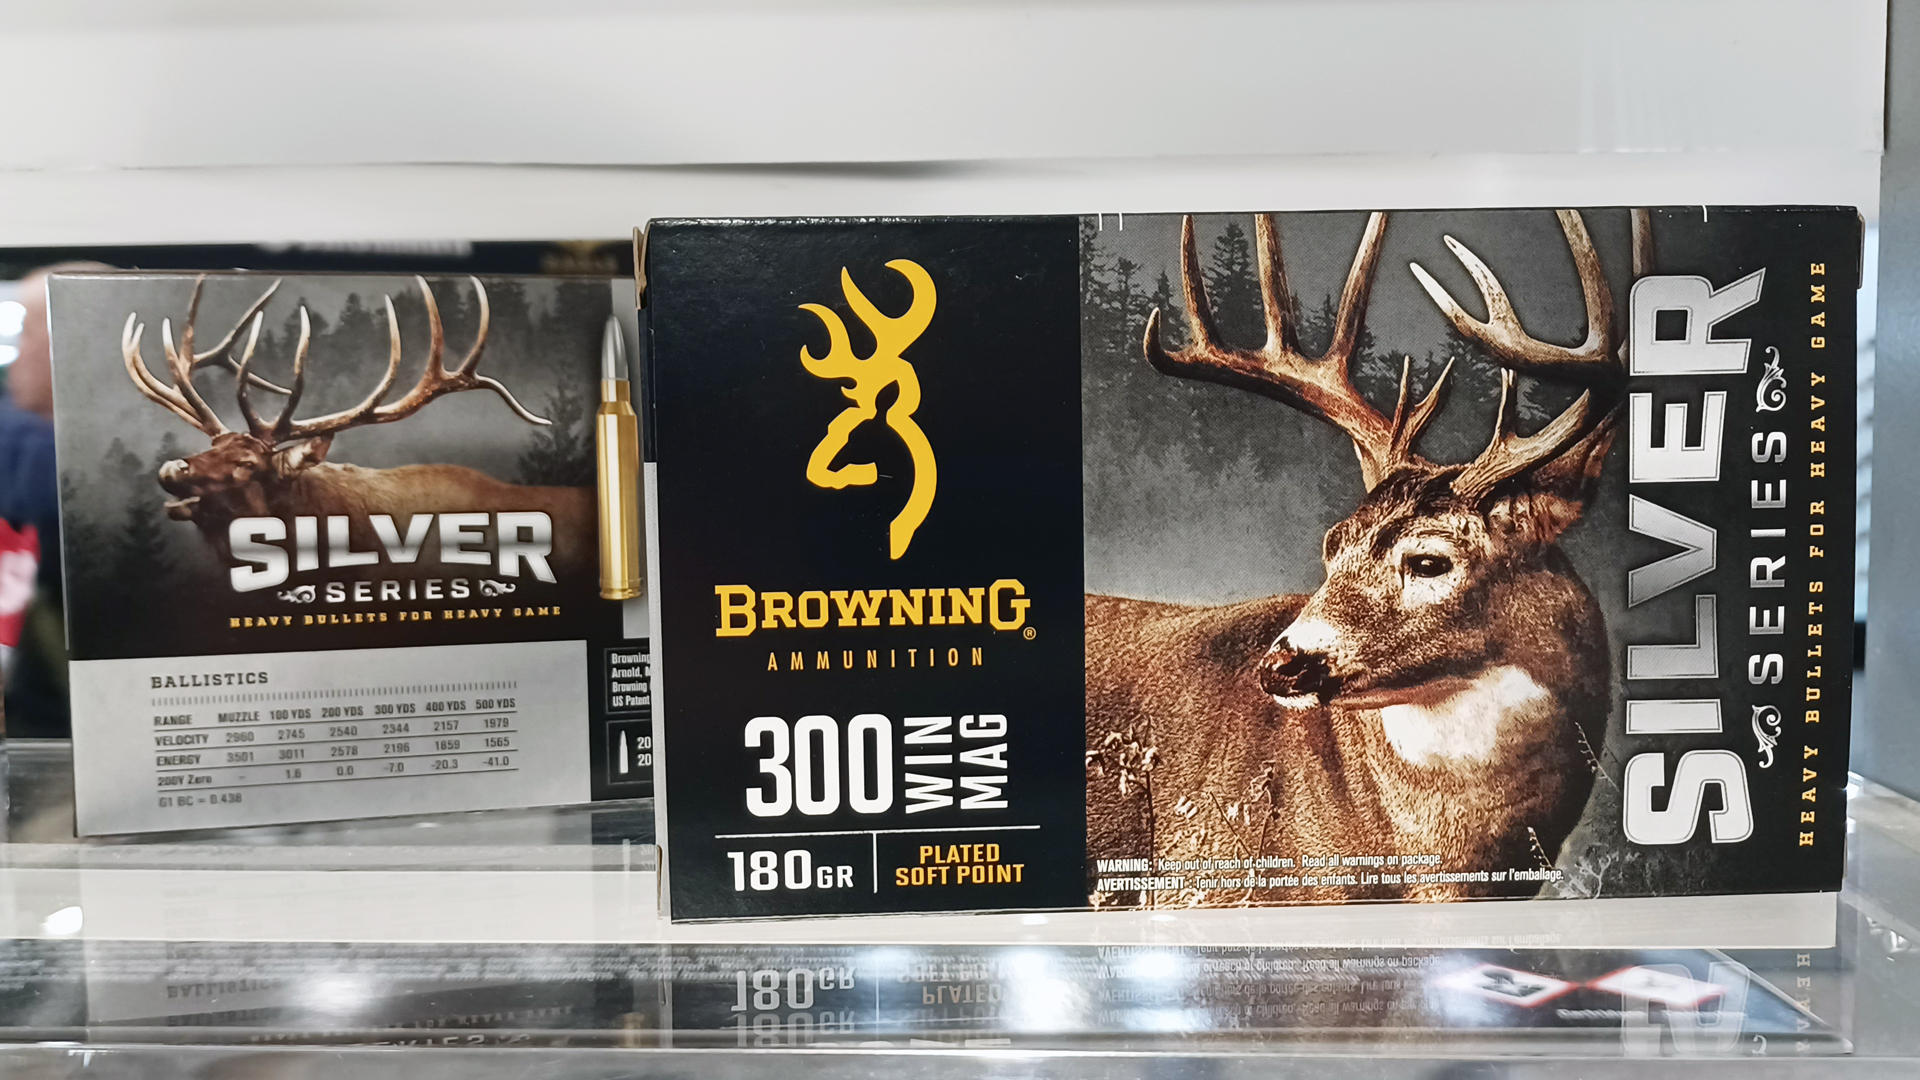 Browning Silver Series ammunition deer hunting bullets ammo SHOT Show 2023 new product announcement